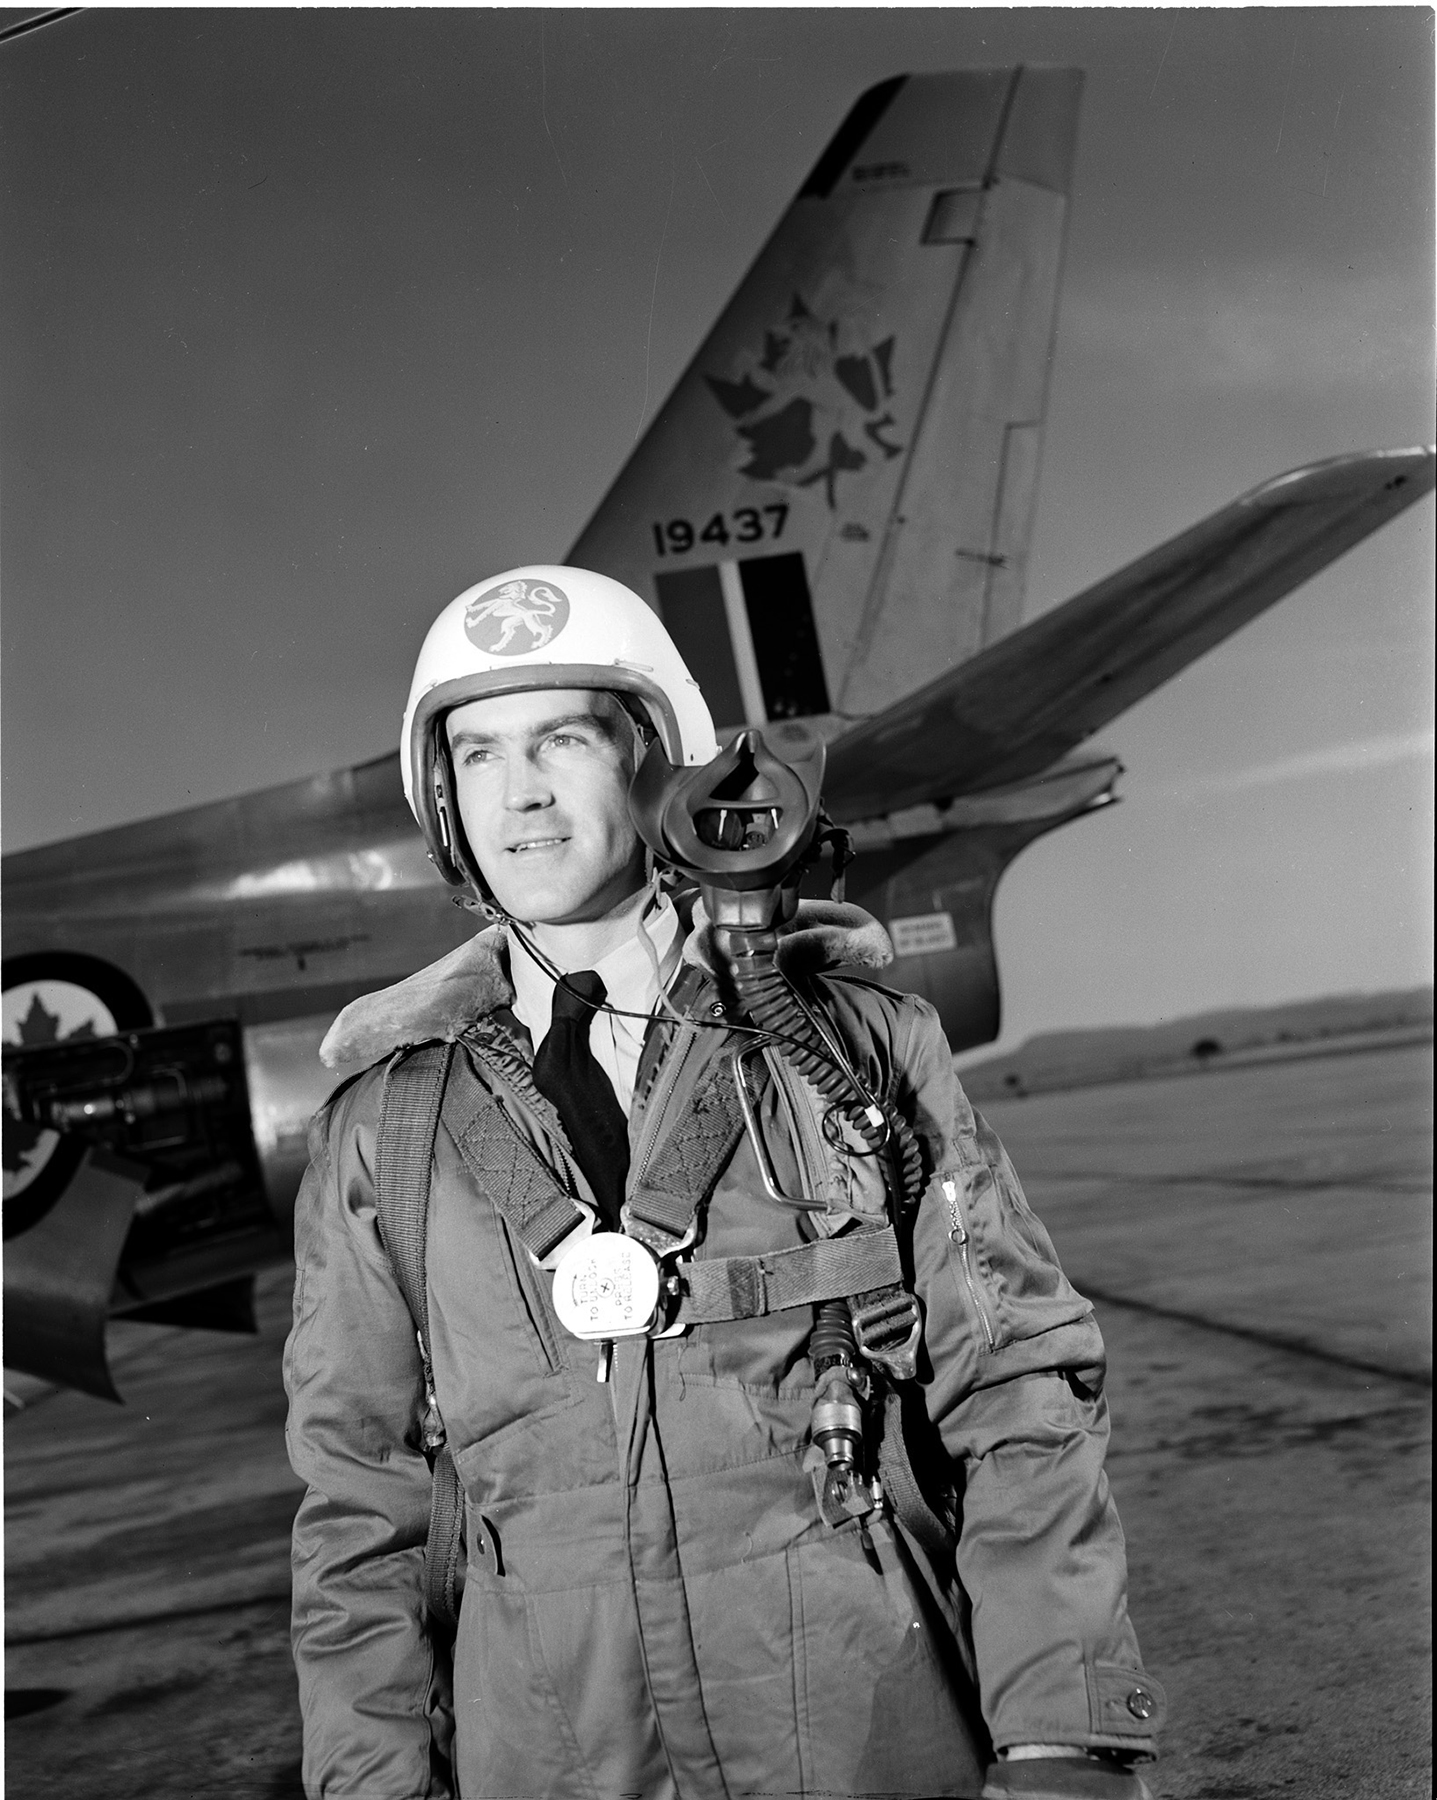 On February 2, 1953, Flying Officer J.B. Mullin of Montreal stands to the side of his CF-104 Starfighter supersonic fighter at St. Hubert, Québec. Used primarily as a ground attack, low-level strike and reconnaissance aircraft, the Starfighter served 427 Squadron and the RCAF beginning in the early-1960s, replacing its predecessor, the F-86 Sabre. PHOTO: DND Archives, PL-56148